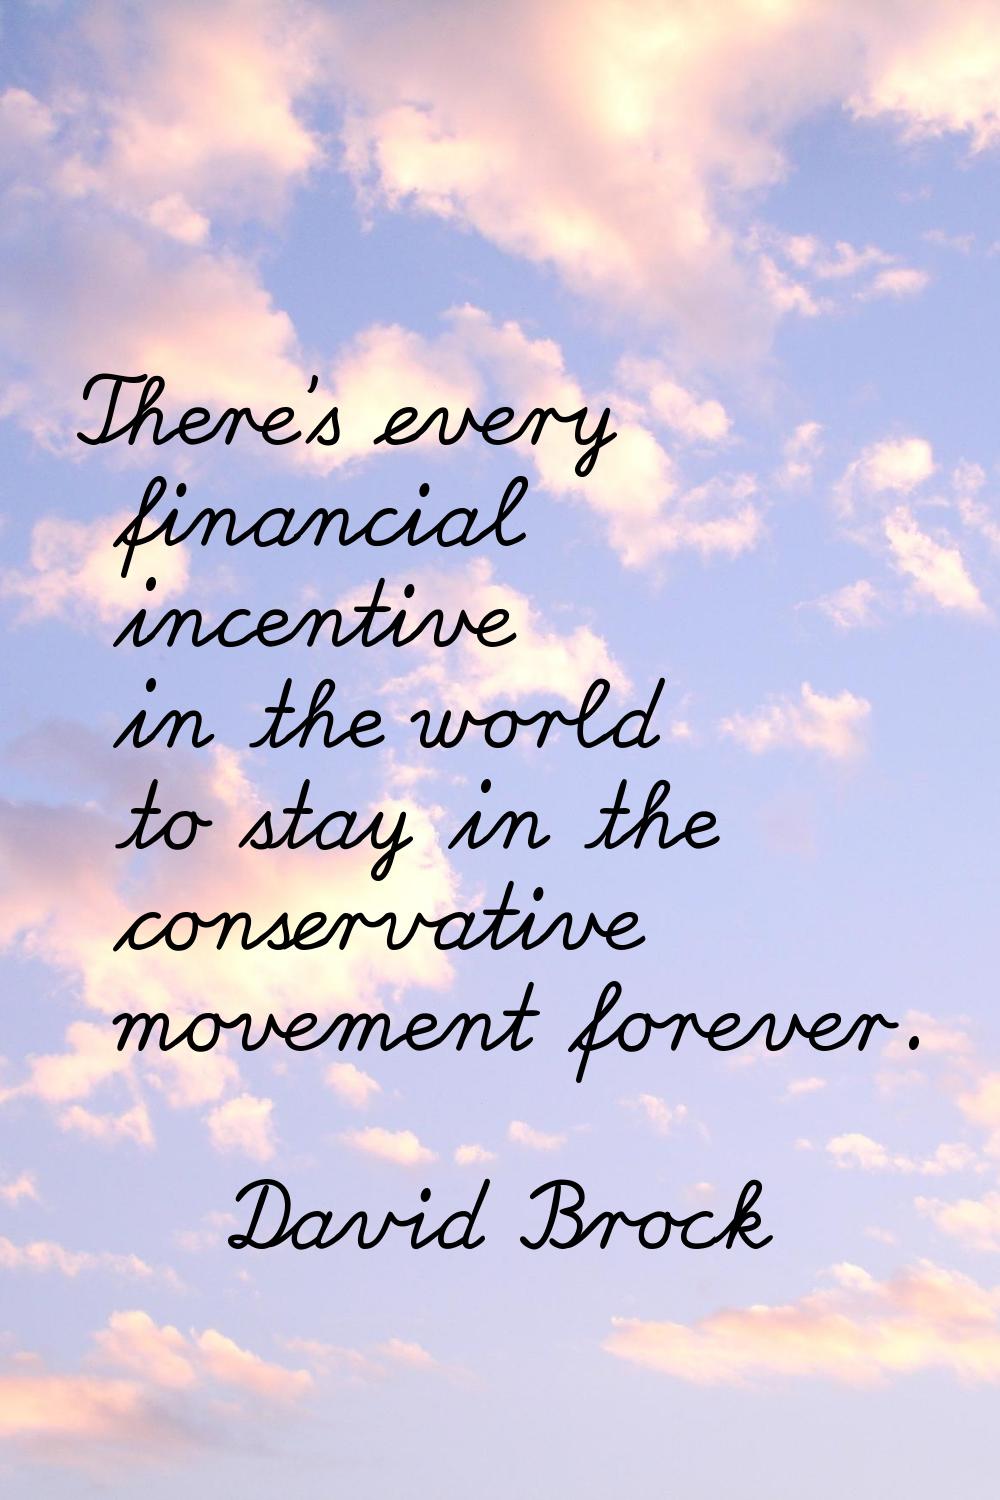 There's every financial incentive in the world to stay in the conservative movement forever.